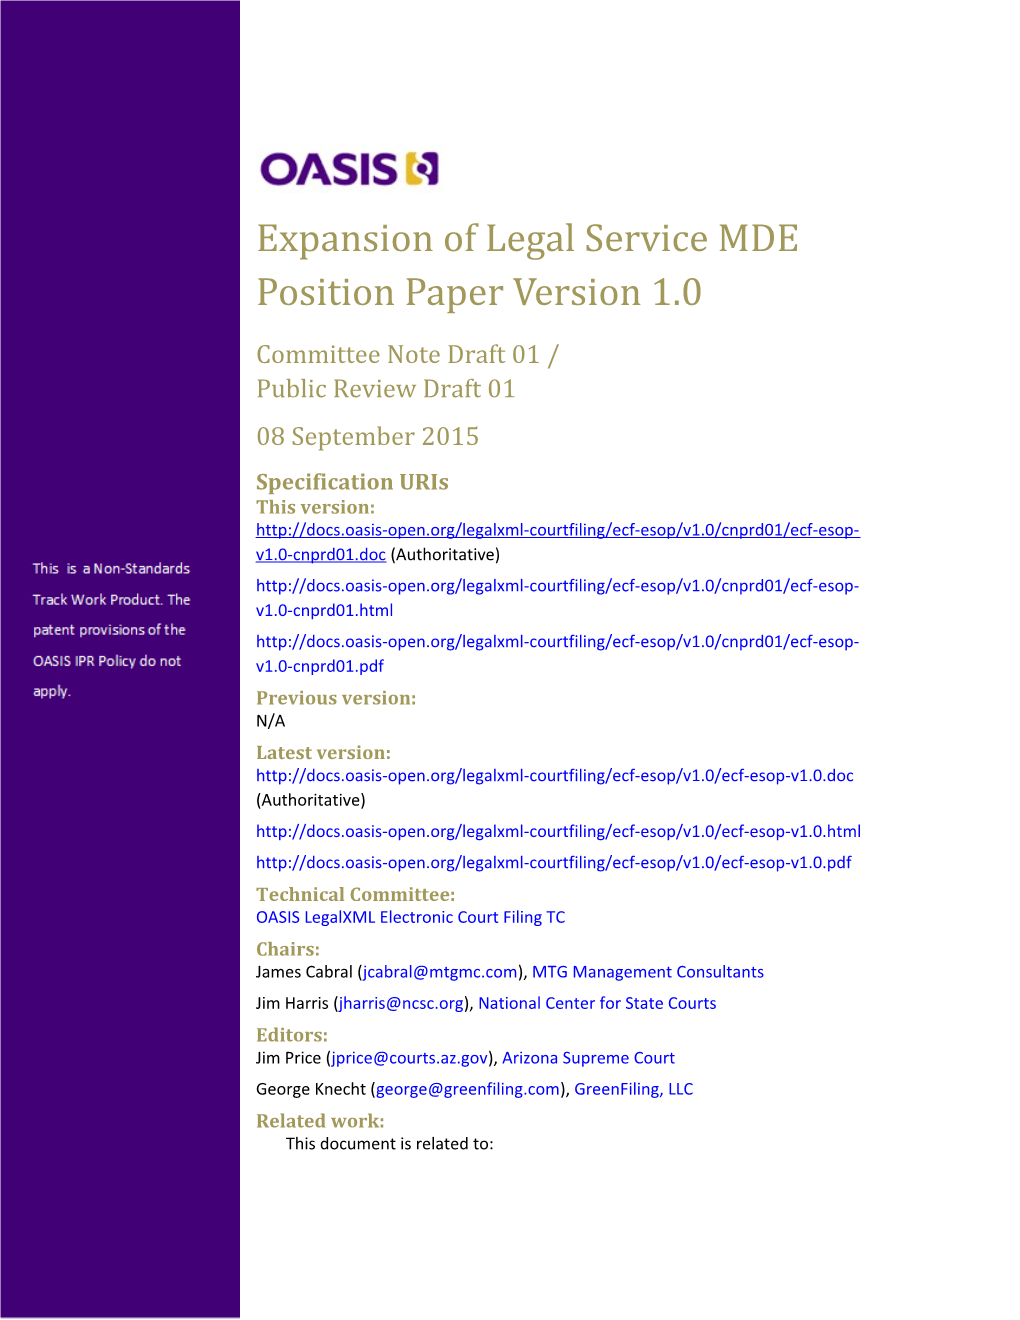 Expansion of Legal Service MDE Position Paper Version 1.0